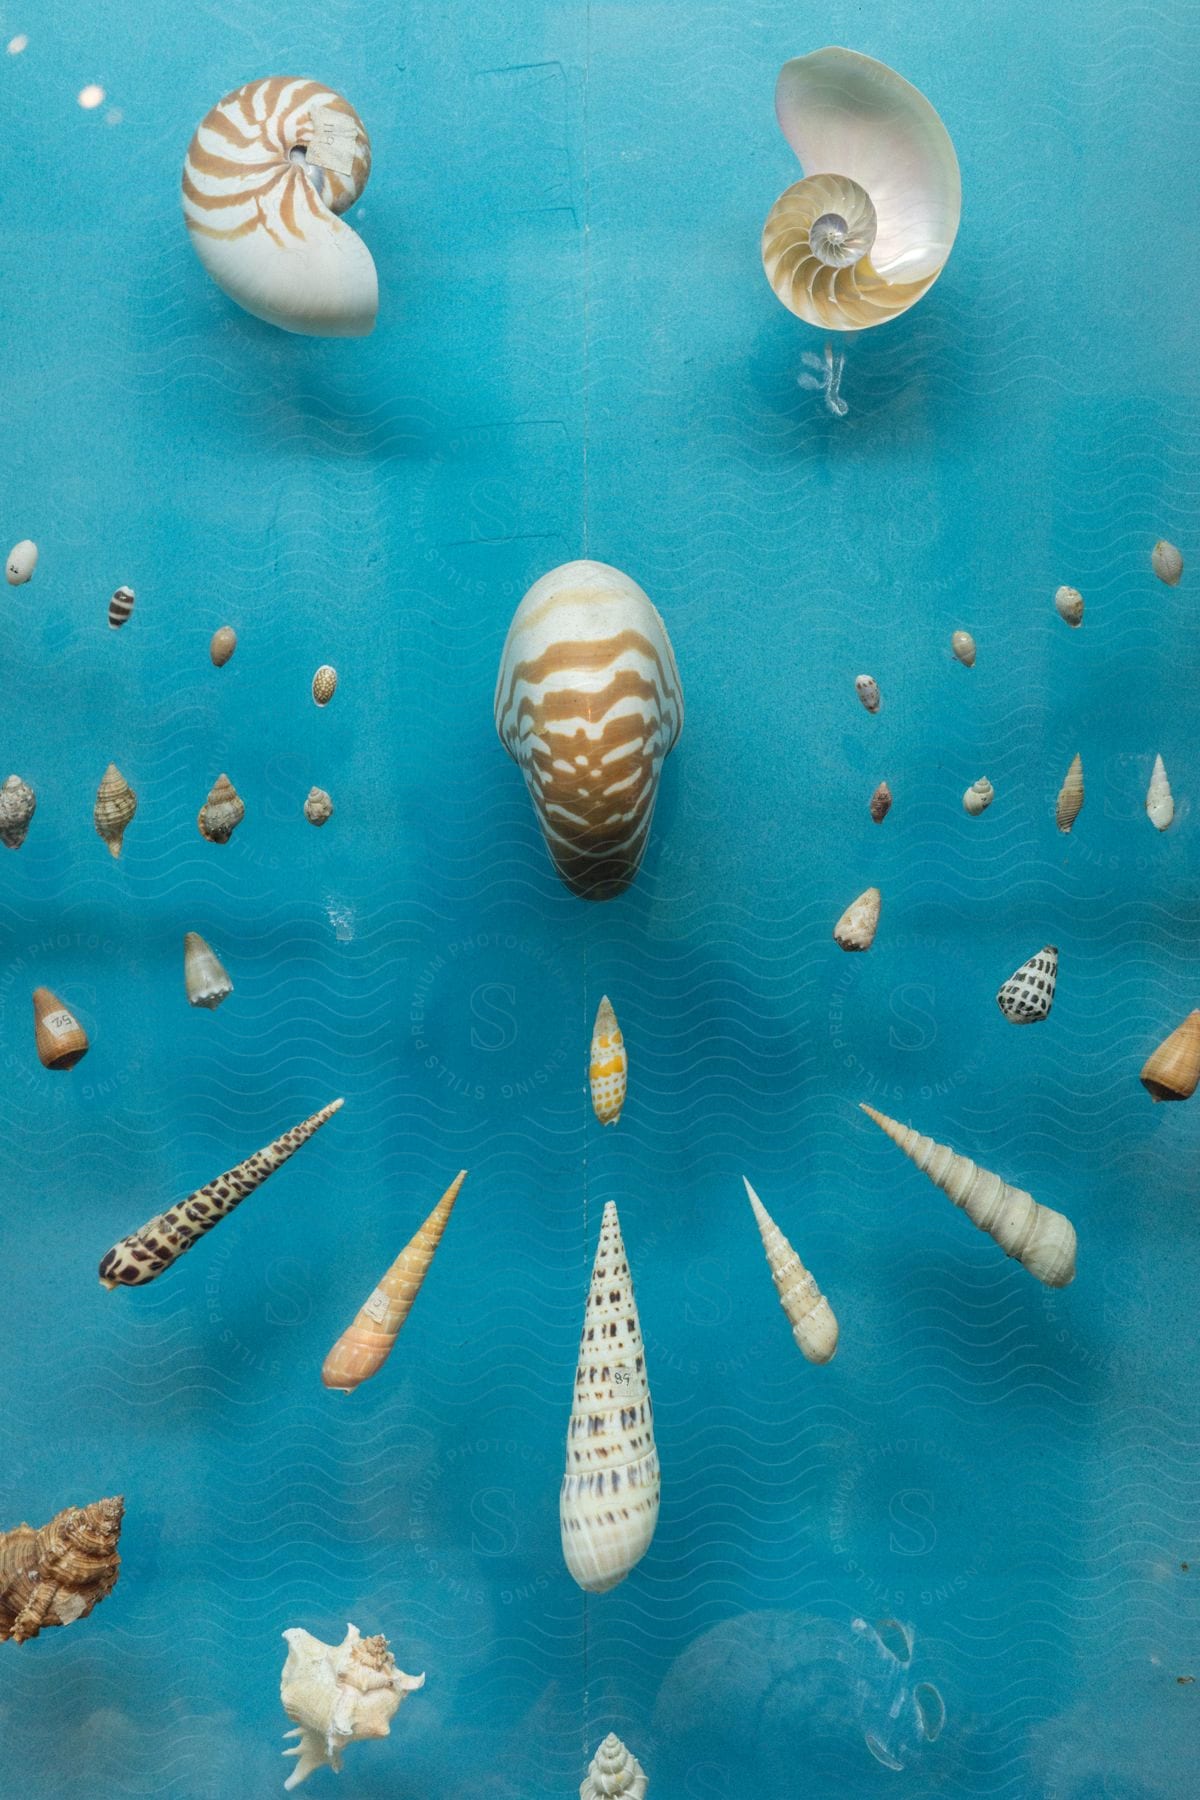 A collection of seashells set against a vibrant blue background.